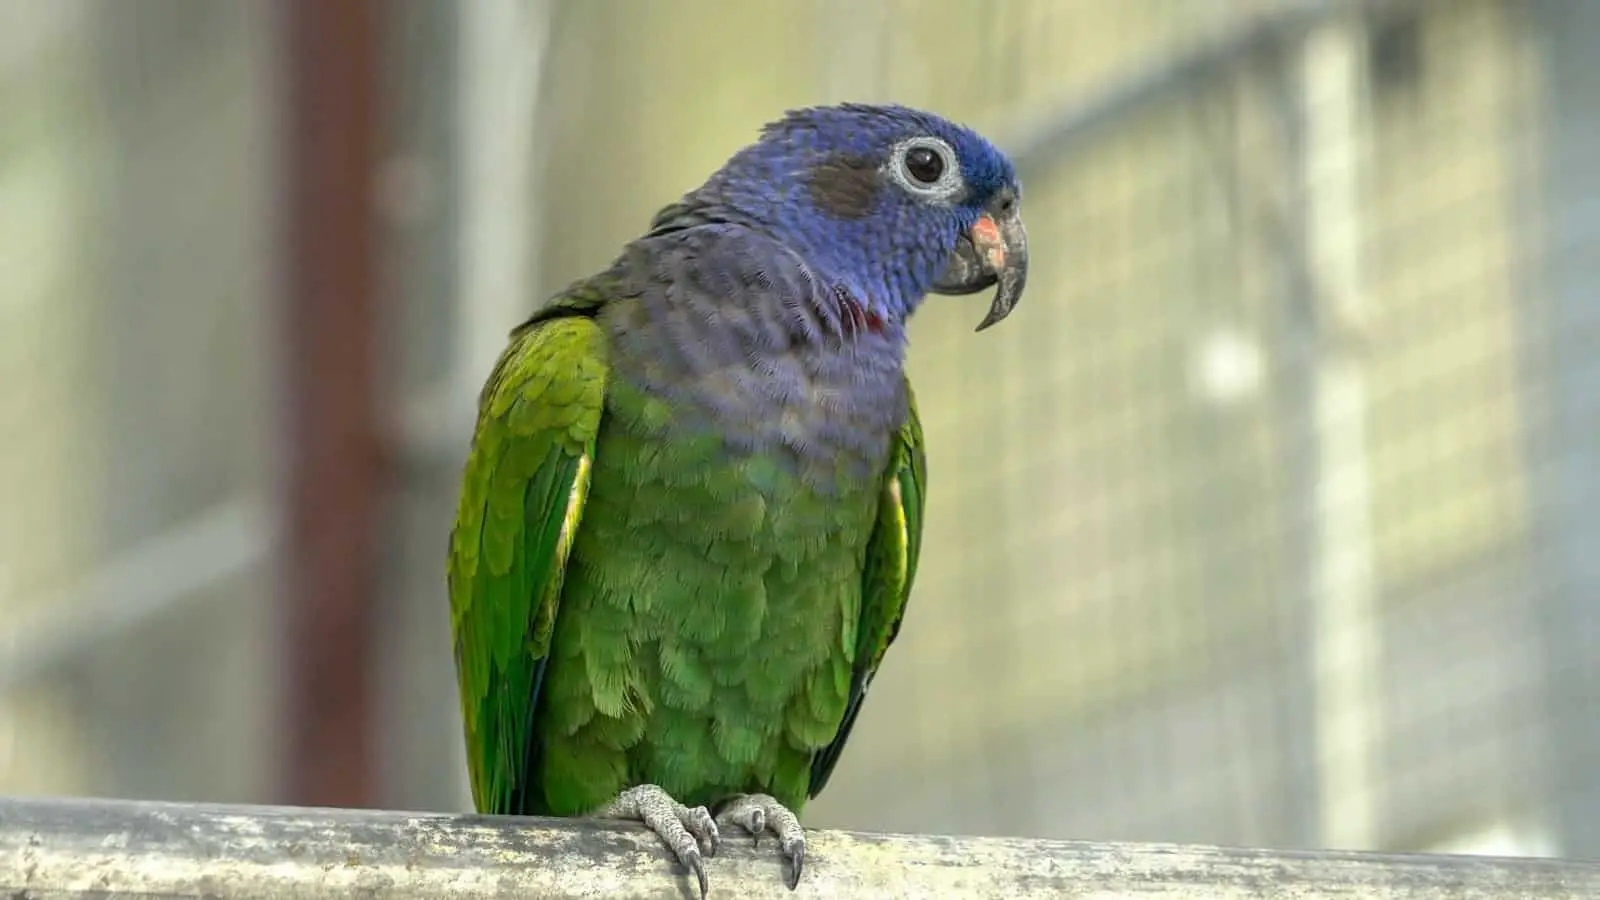 The Ultimate Guide To Pionus Parrot Price exclusively at Petrestart.com.